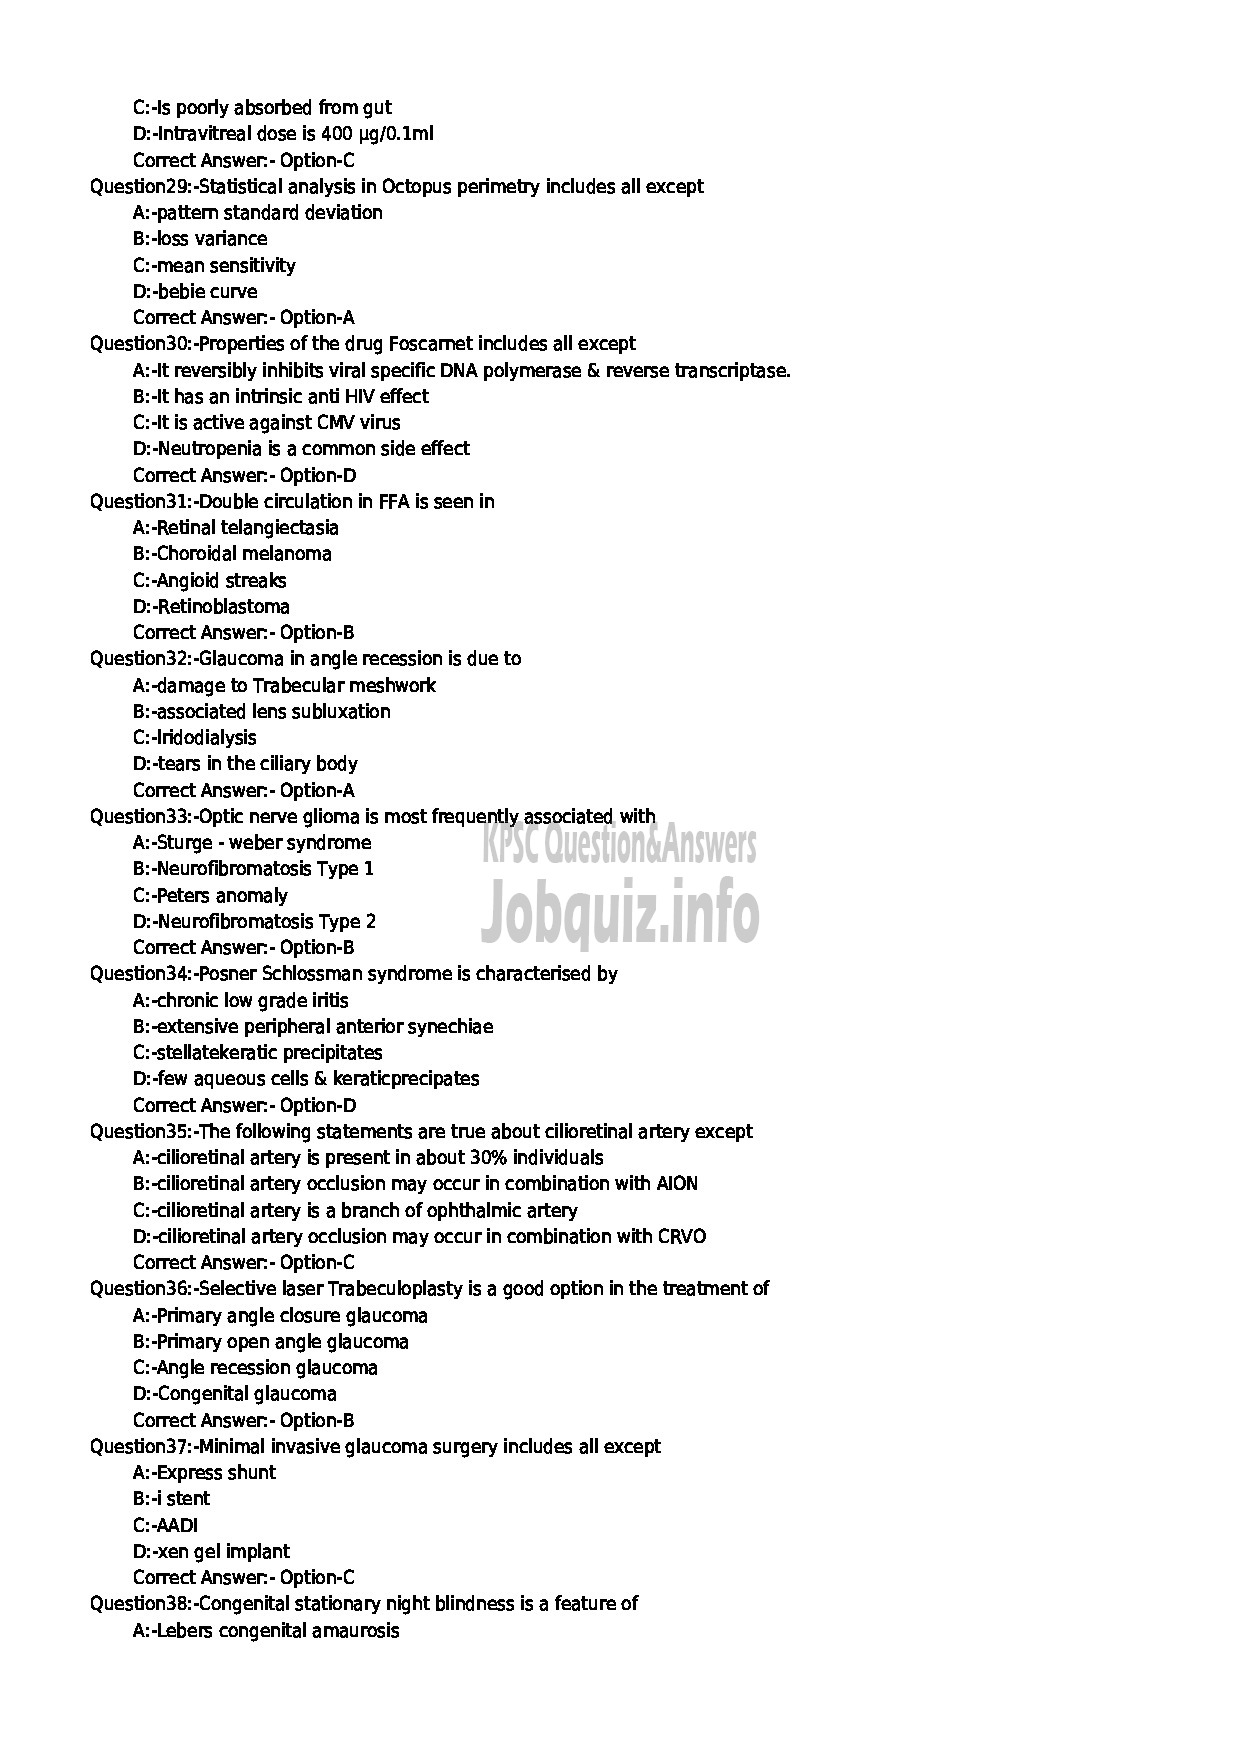 Kerala PSC Question Paper - Assistant Professor in Ophthalmology Medical Education-4